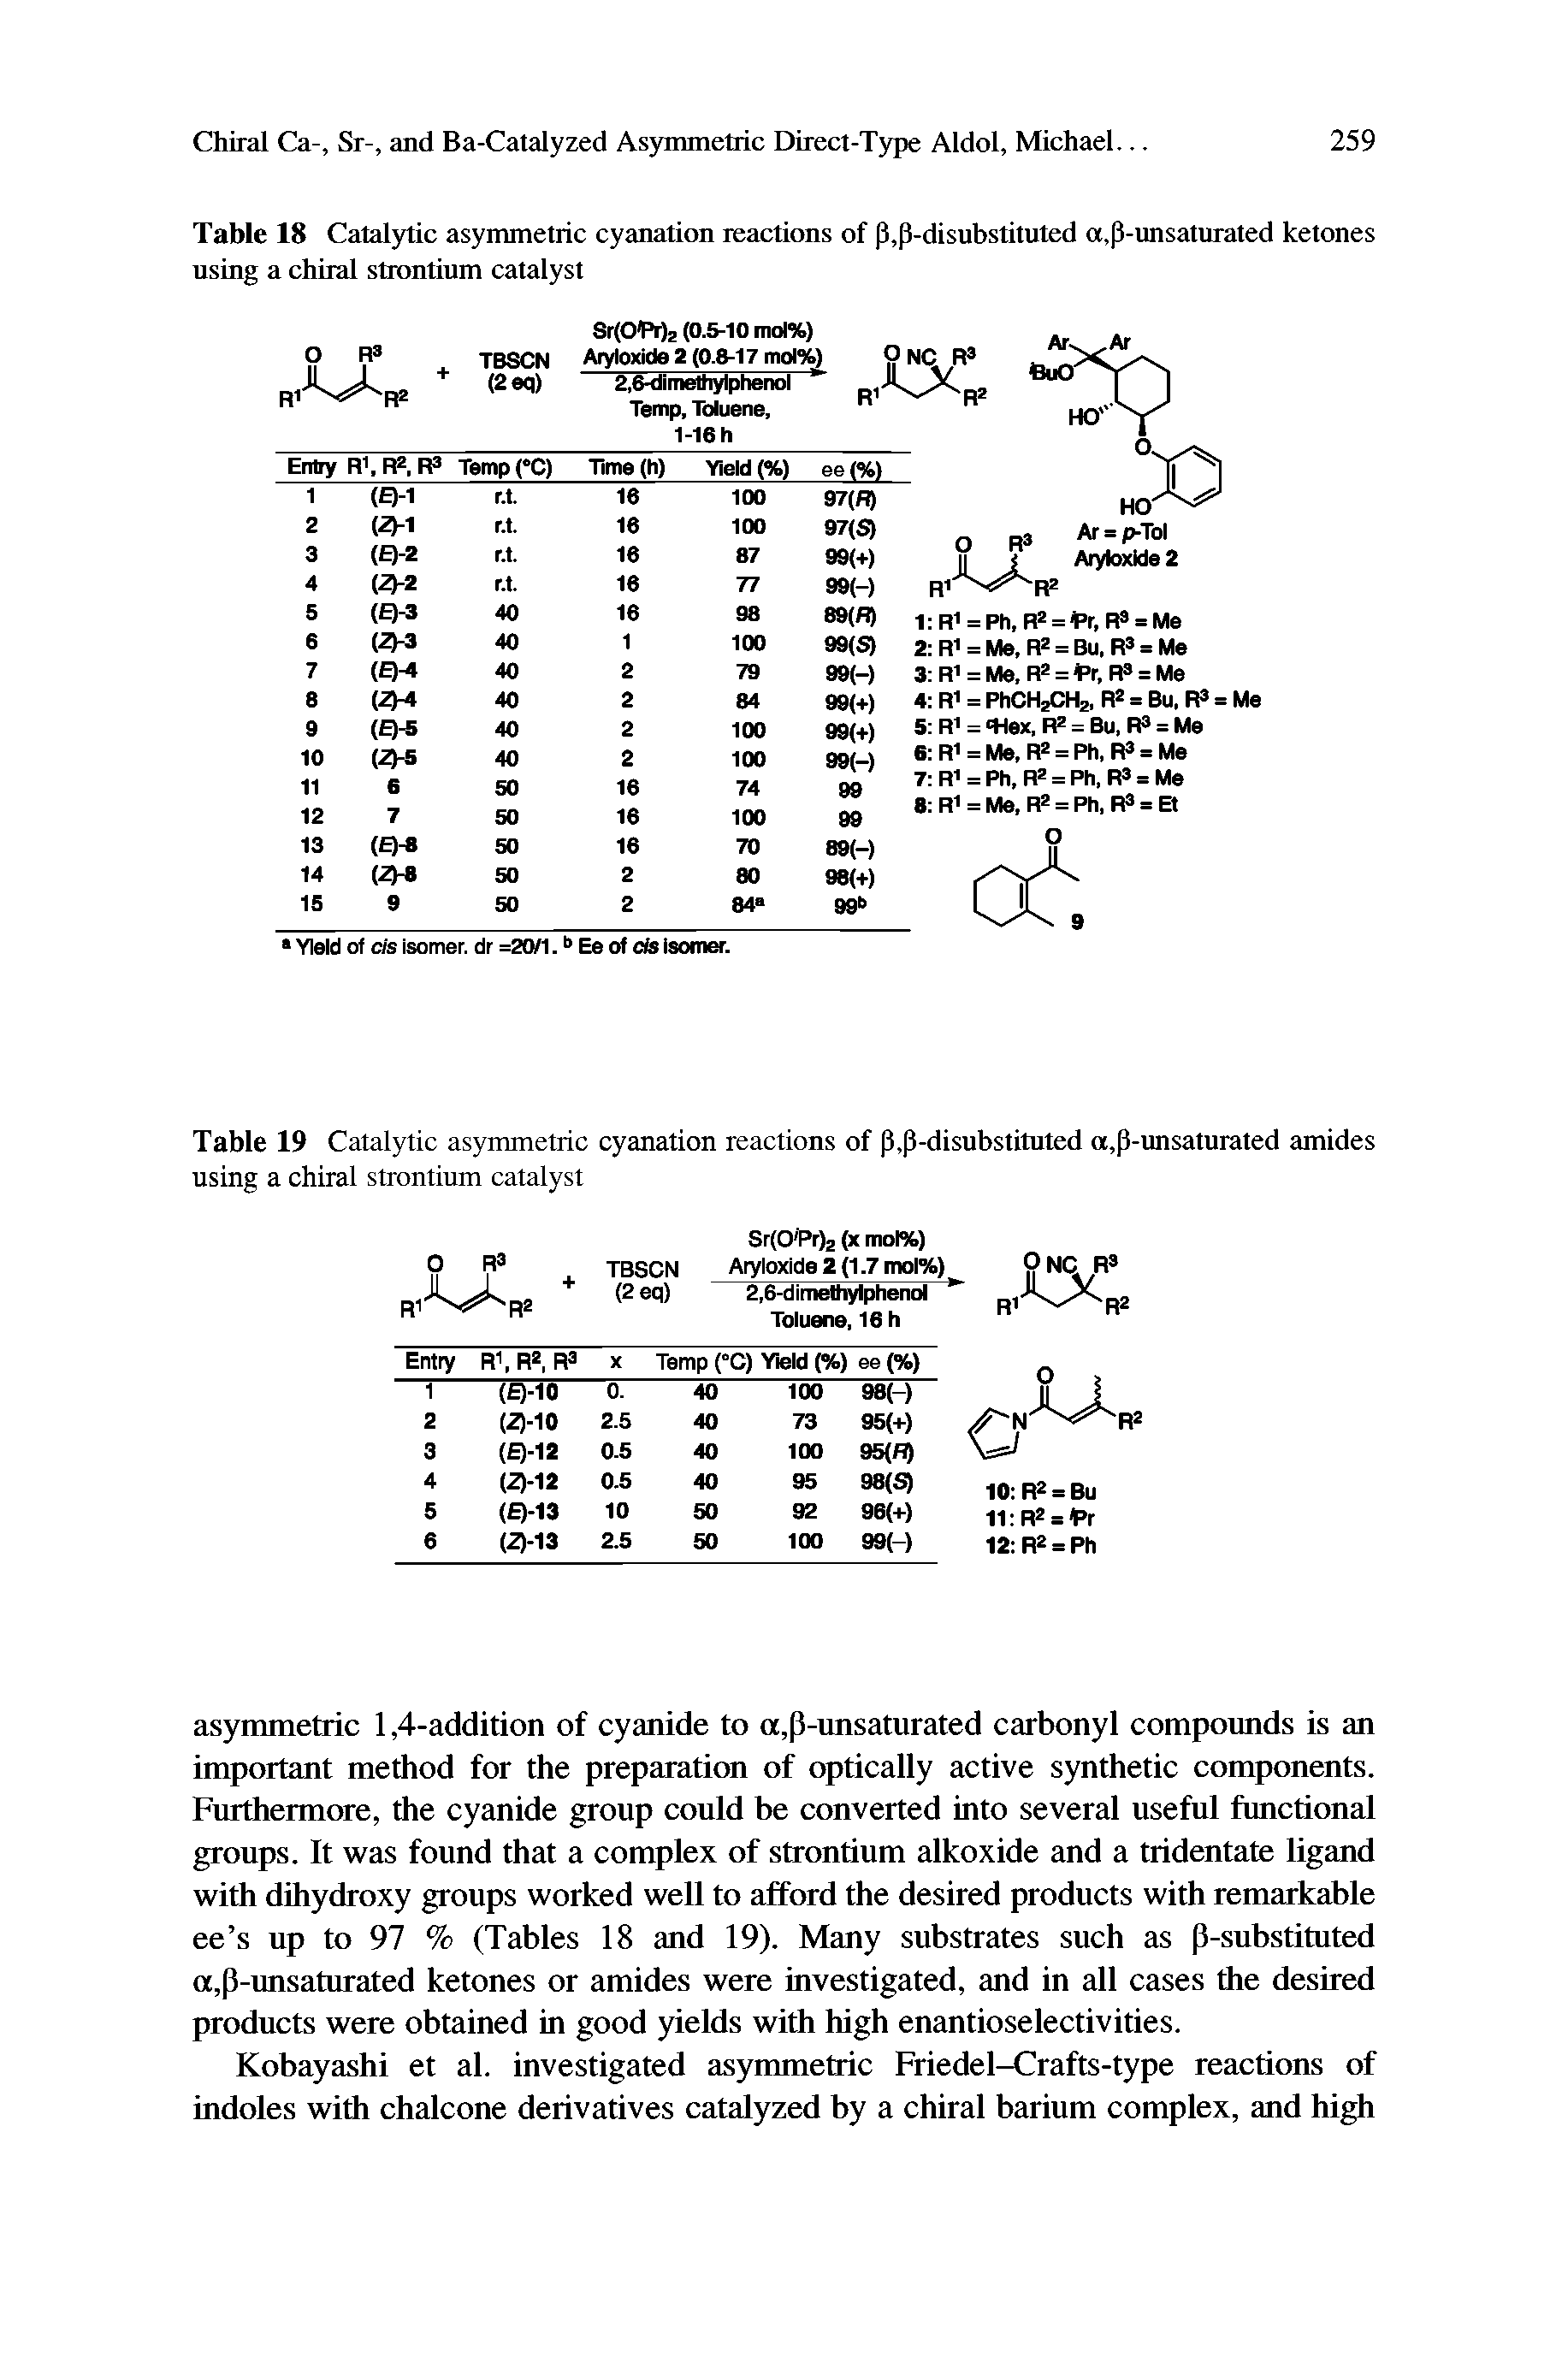 Table 18 Catalytic asymmetric cyanation reactions of p,p-disubstituted a,p-imsaturated ketones using a chiral strontium catalyst...